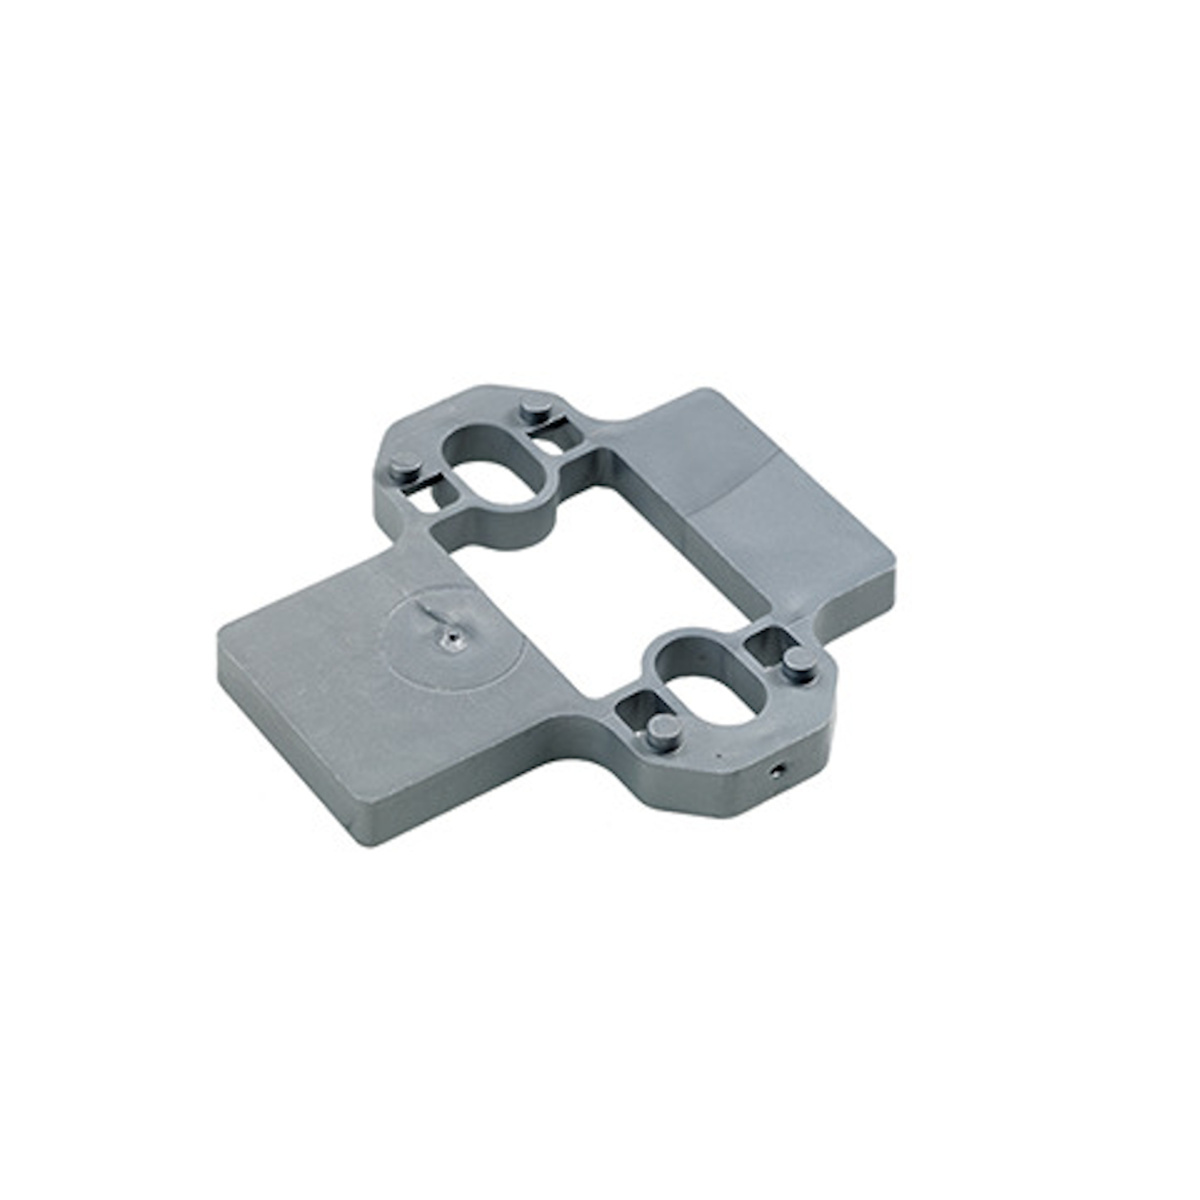 Parallel Adapter for Cross Mounting Plates, D = 3.0 mm